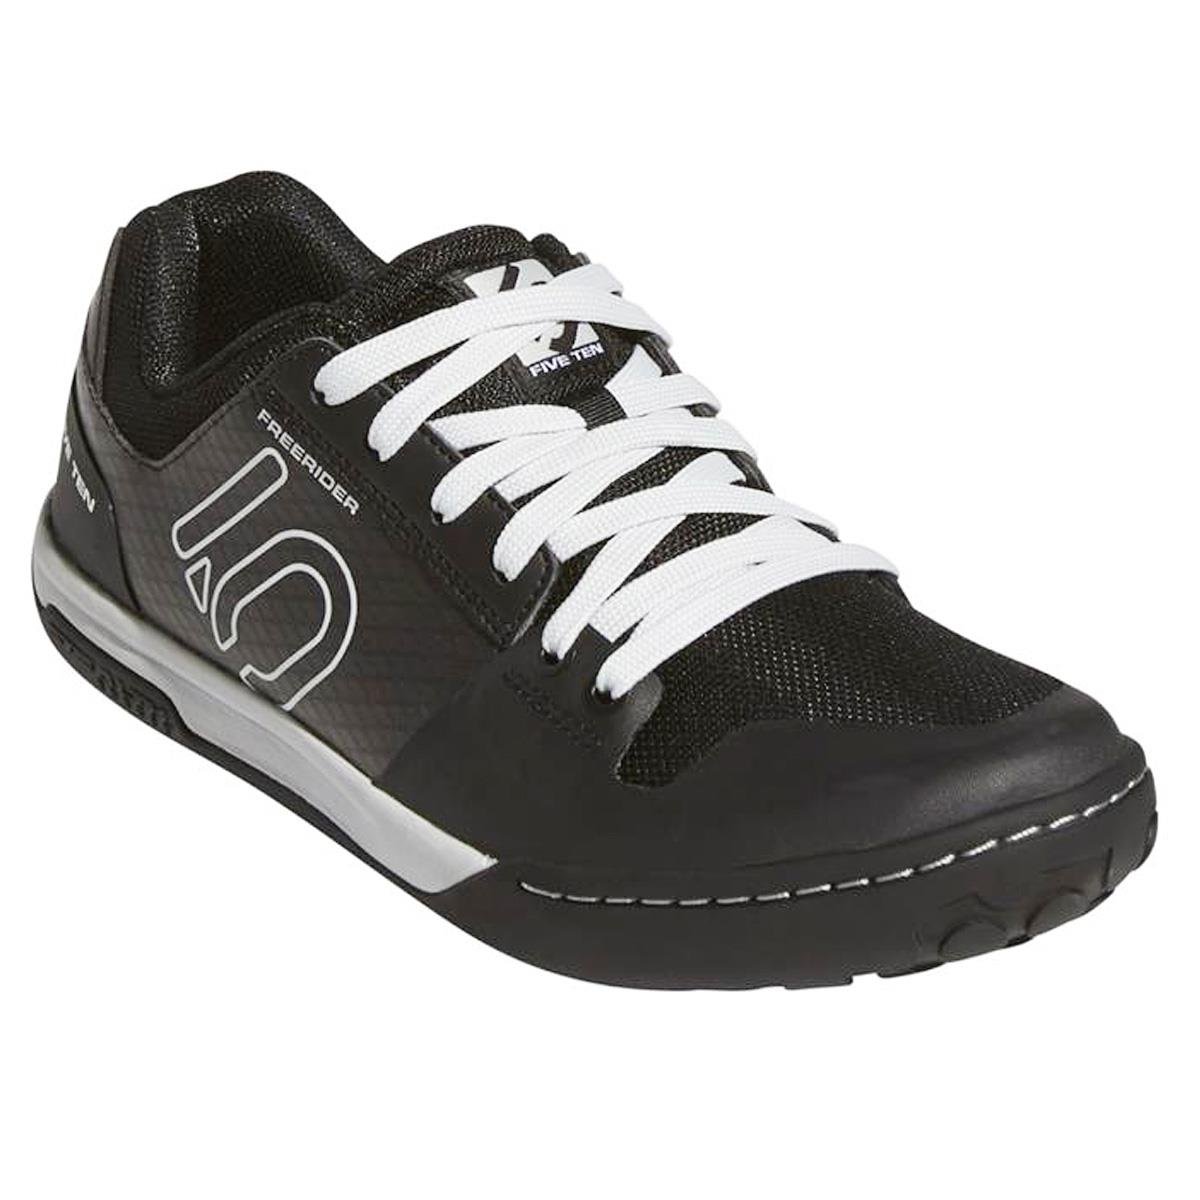 Five Ten Bike Shoes Freerider Contact Core Black/Clear Grey/ftwr White